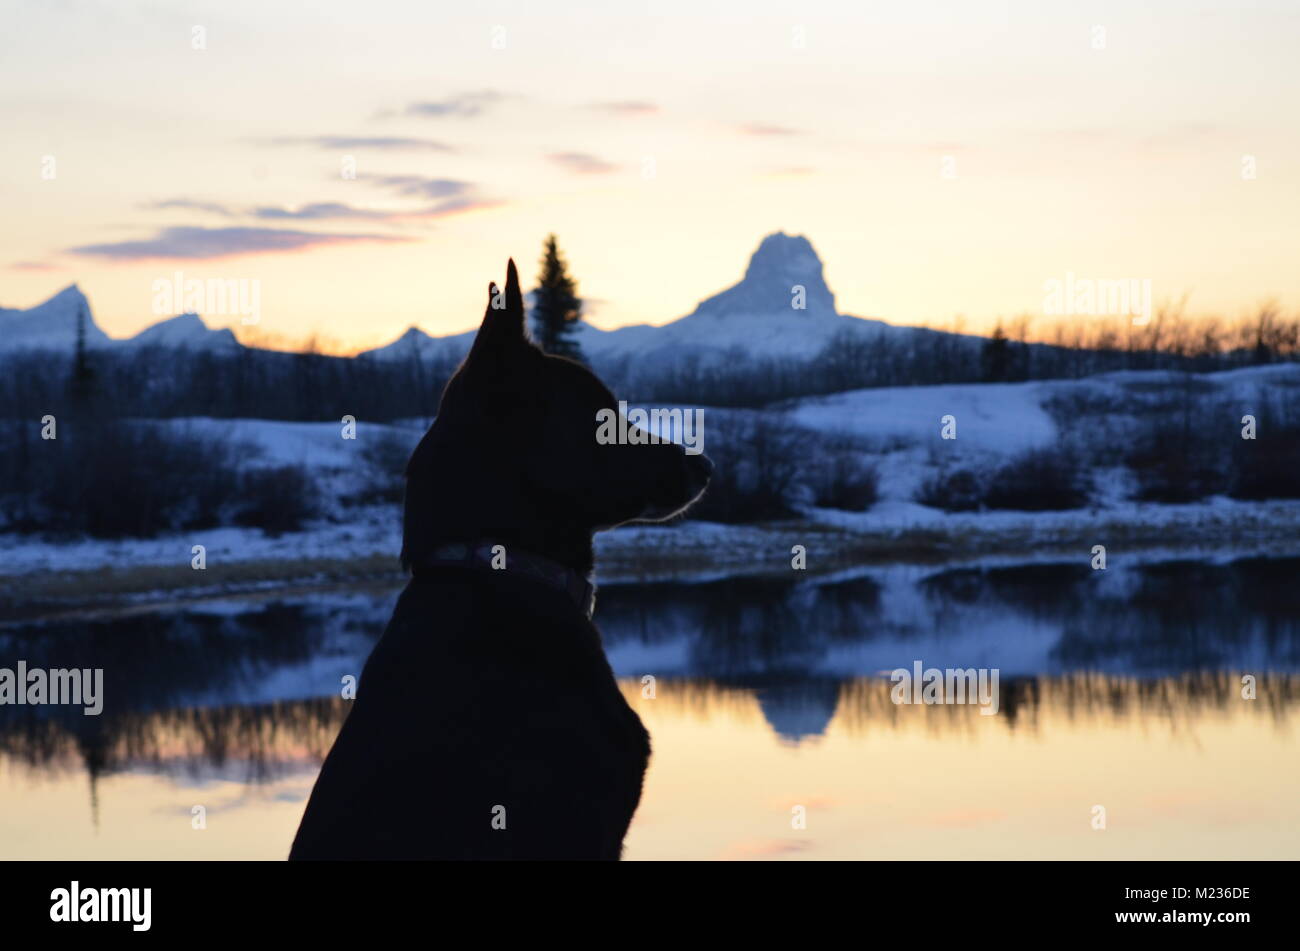 A Border Collie sits and looks out over the calm reflective water, with Chief mountain in the distance with its snow covered peaks at sunset Stock Photo